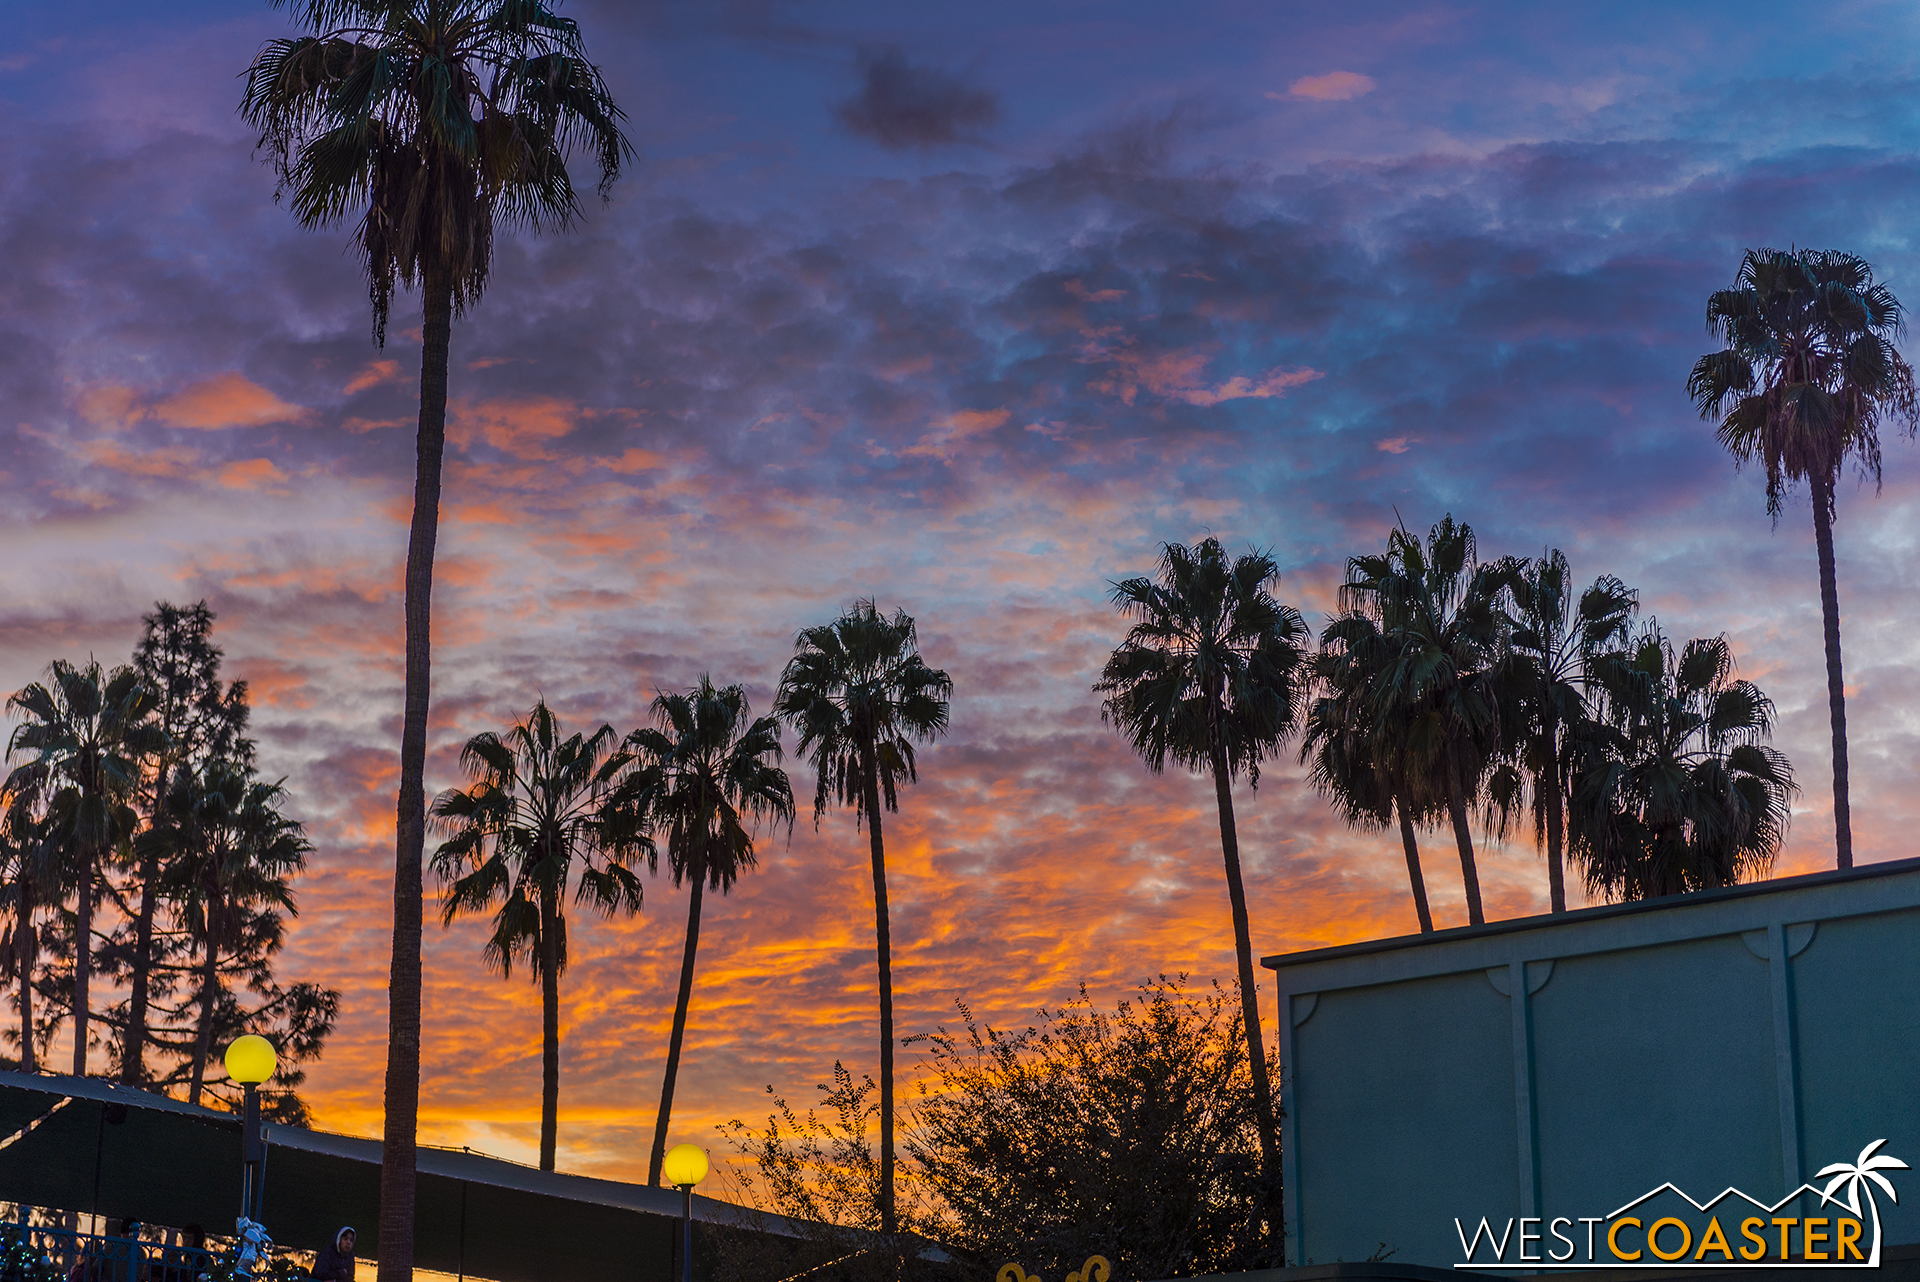  You don't get much more Southern California than pretty skies and palm tree silhouettes. 